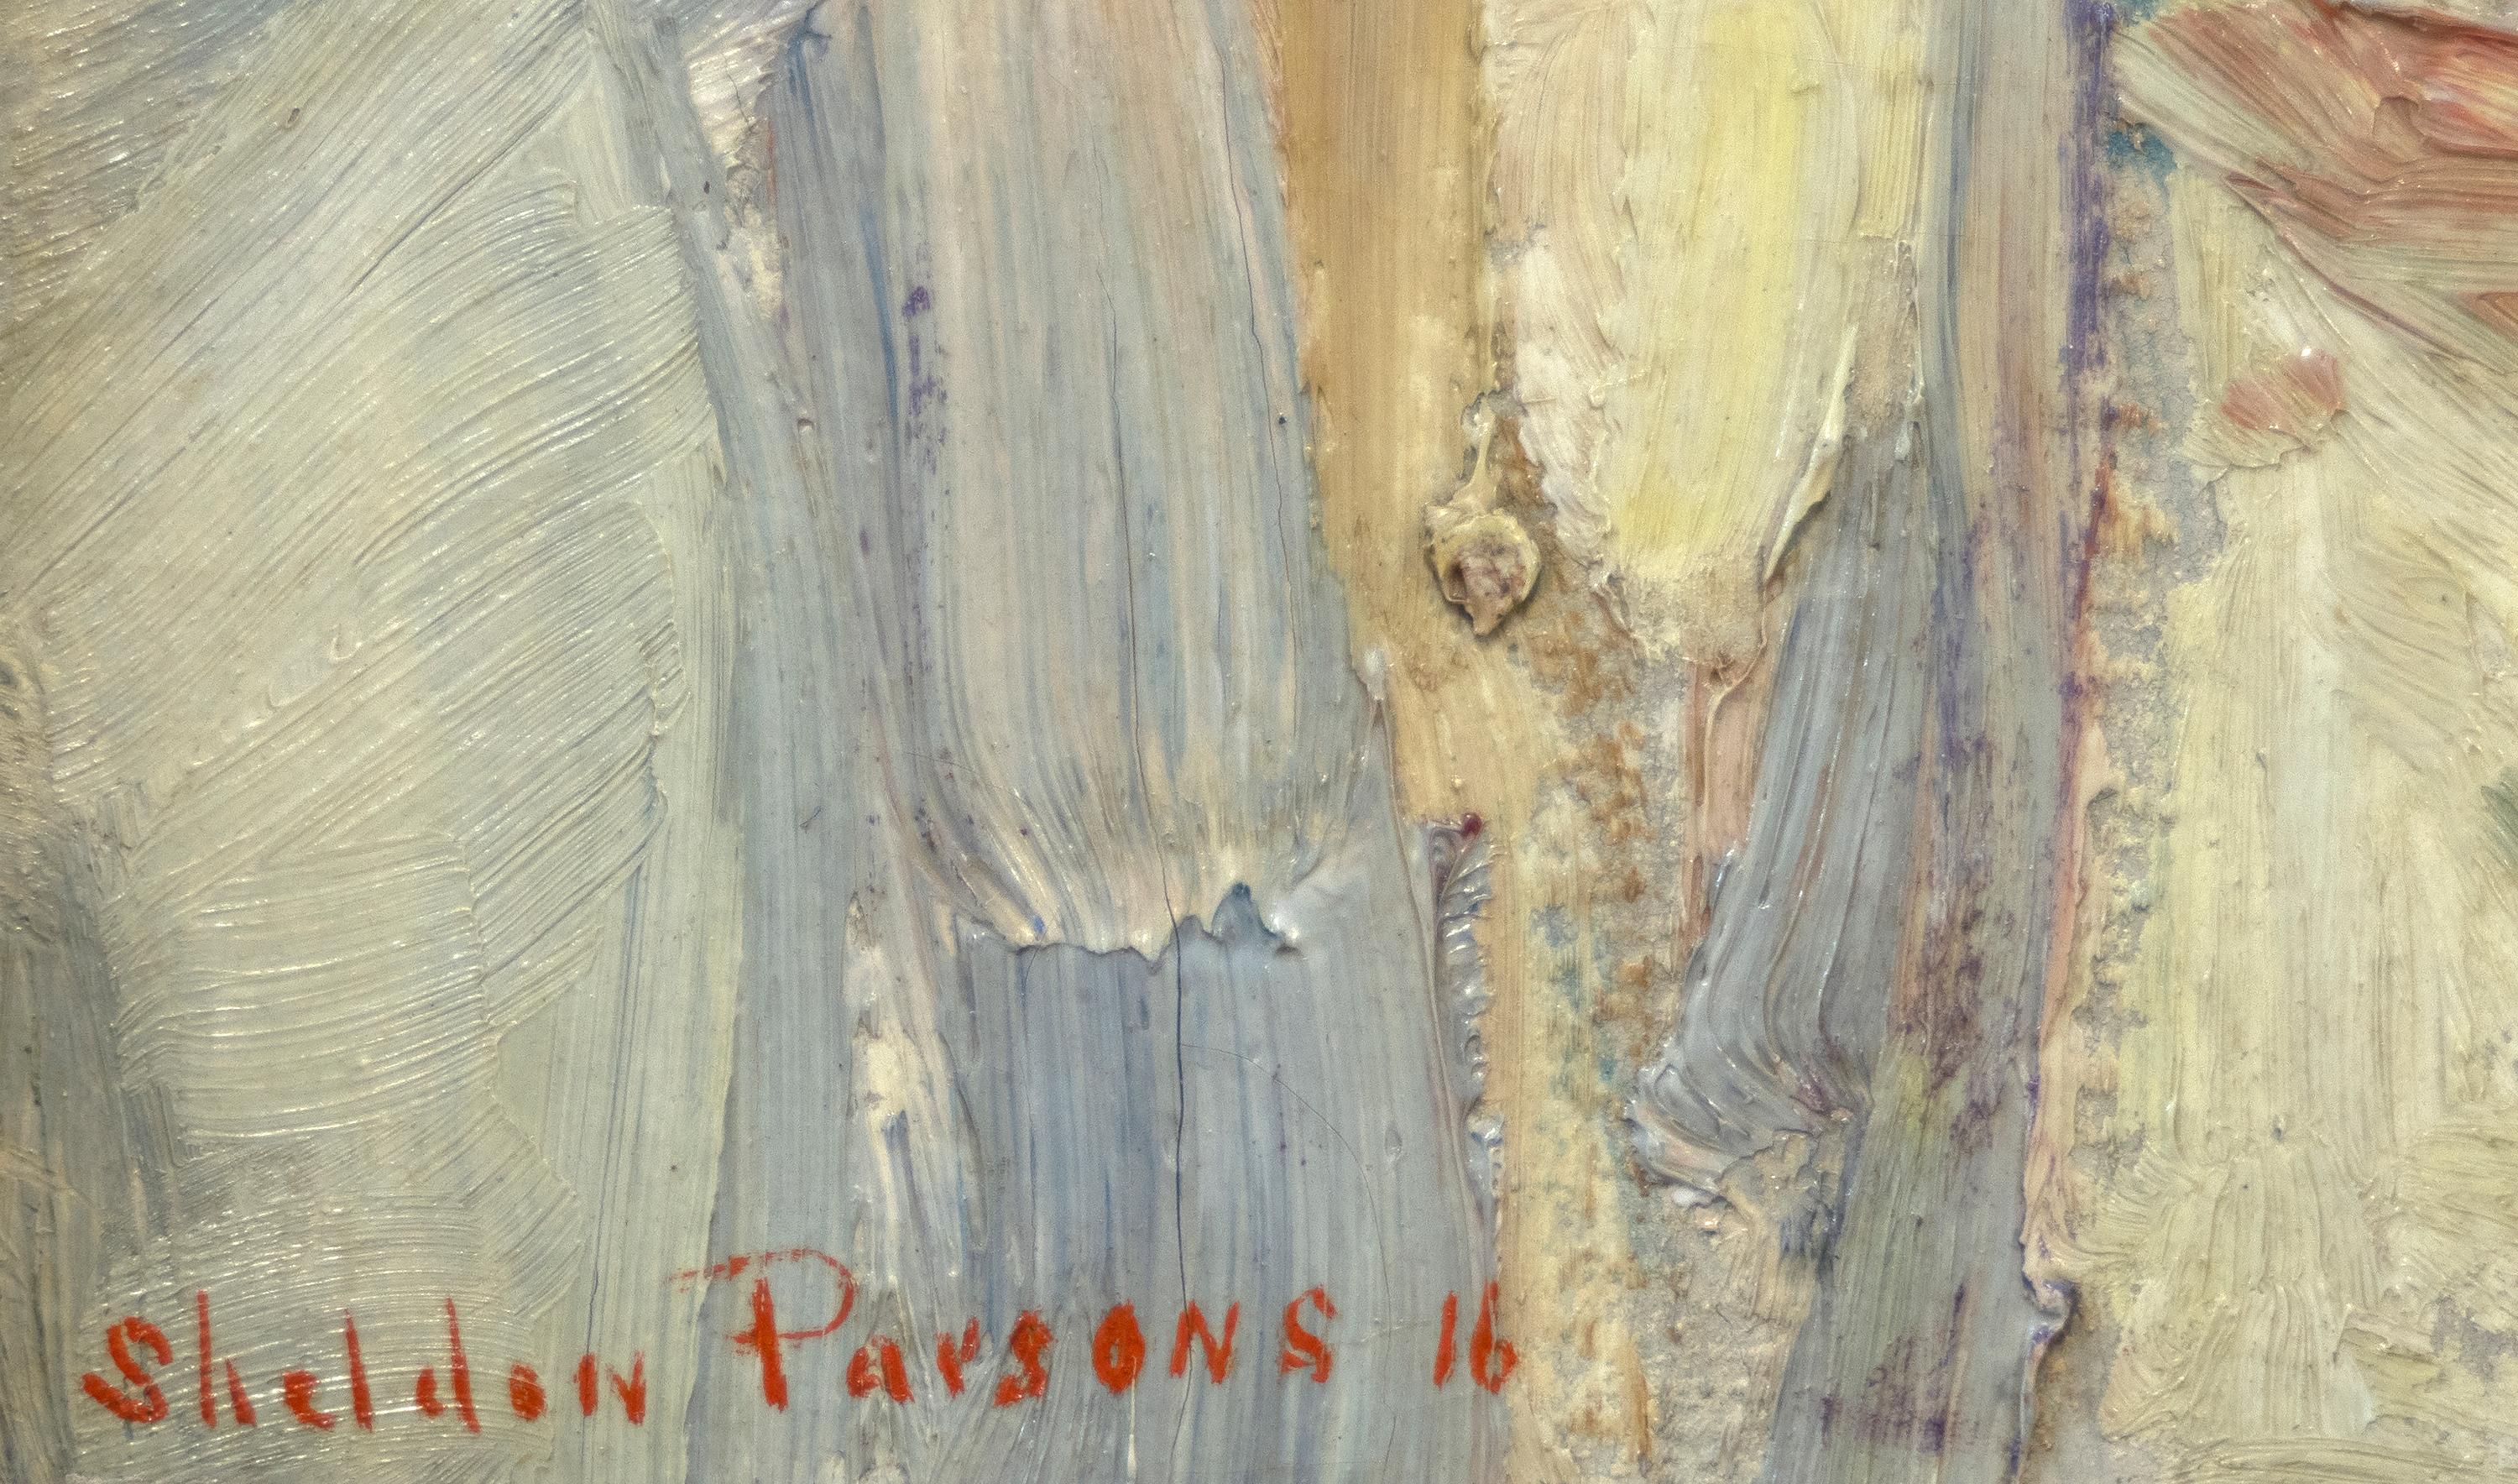 sheldon parsons paintings for sale